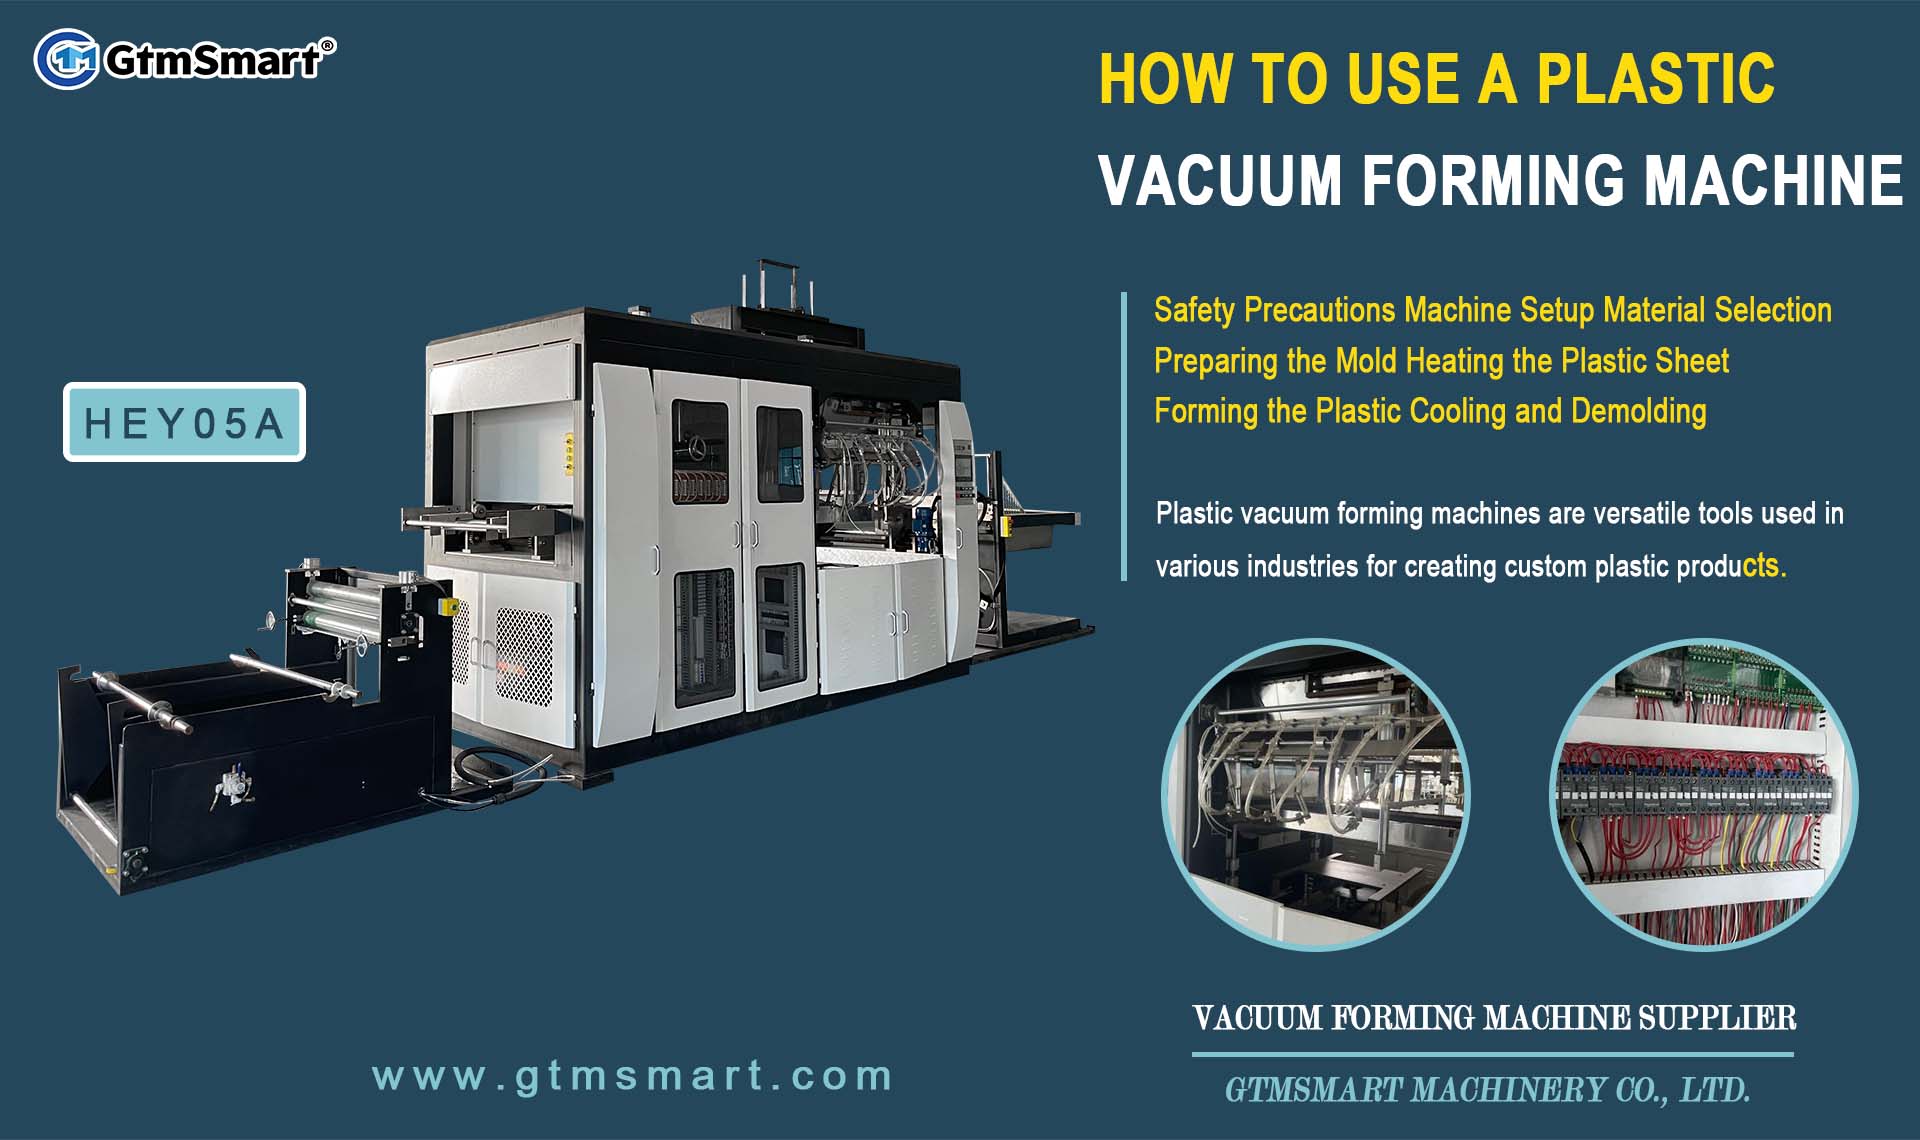 How to Use a Plastic Vacuum Forming Machine